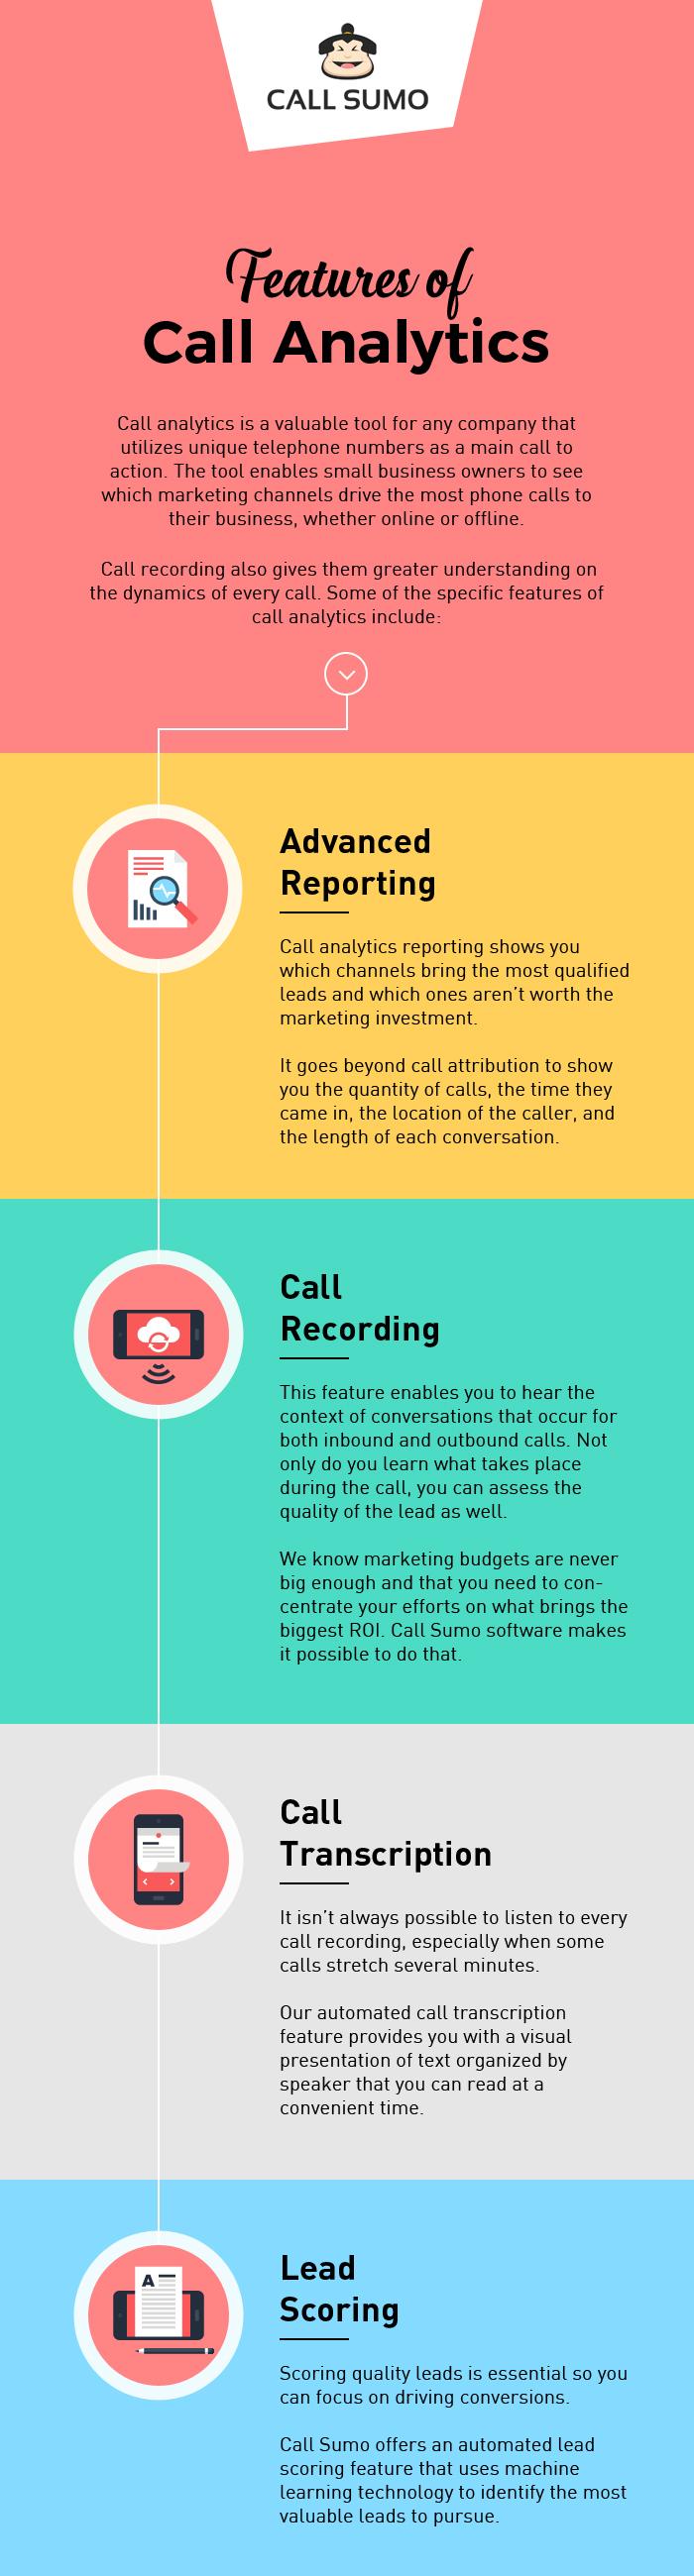 Features of Call Analytics by Call Sumo